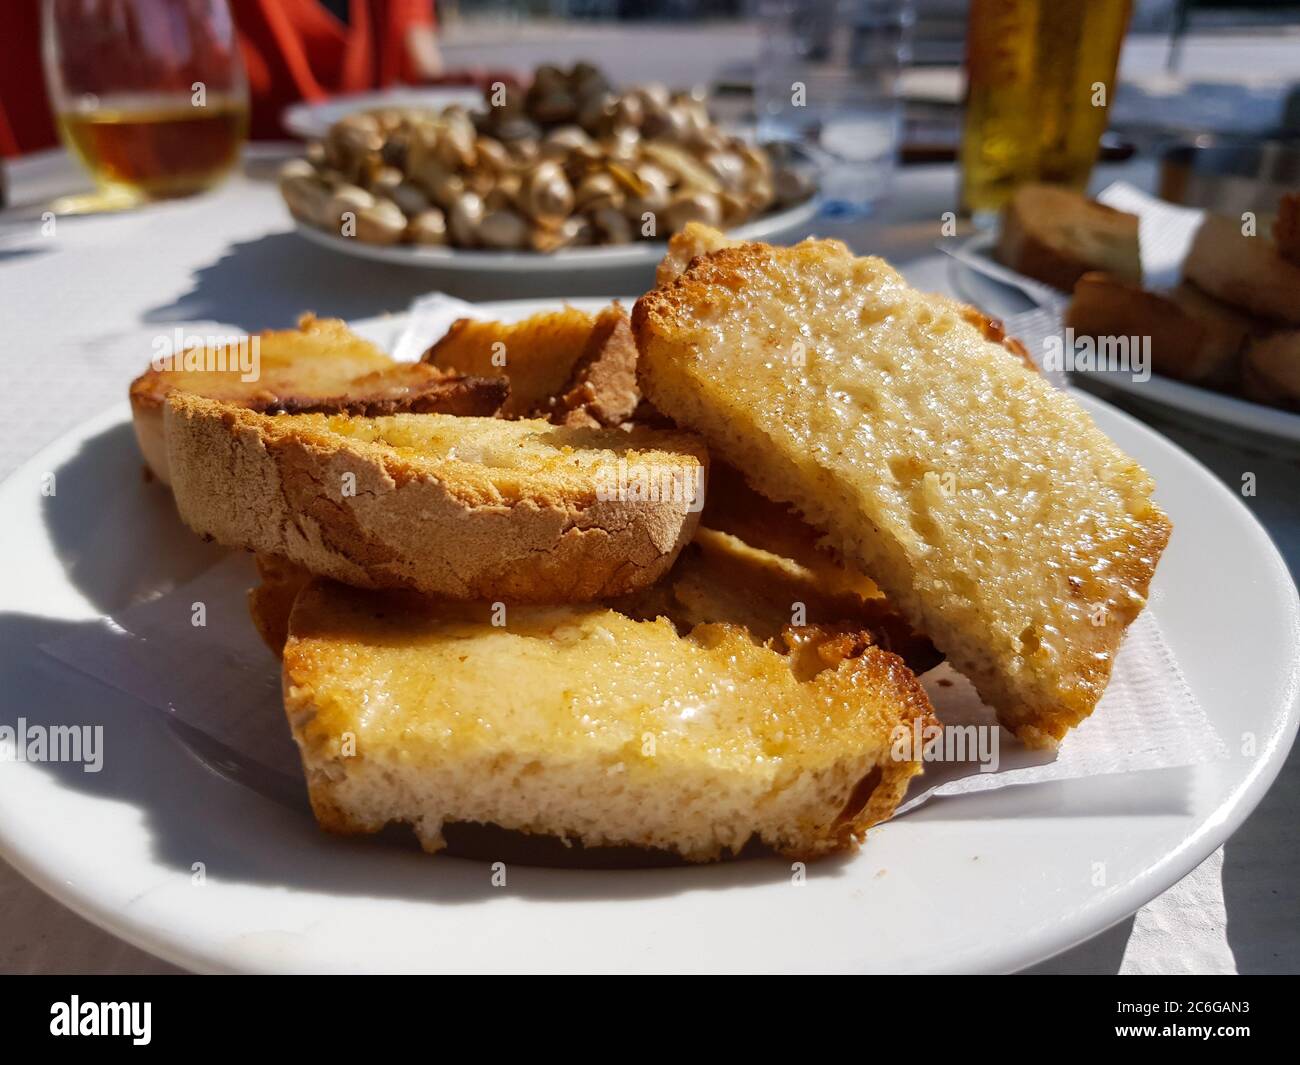 Sliced toasted bread with butter, with cooked snails in the background Stock Photo